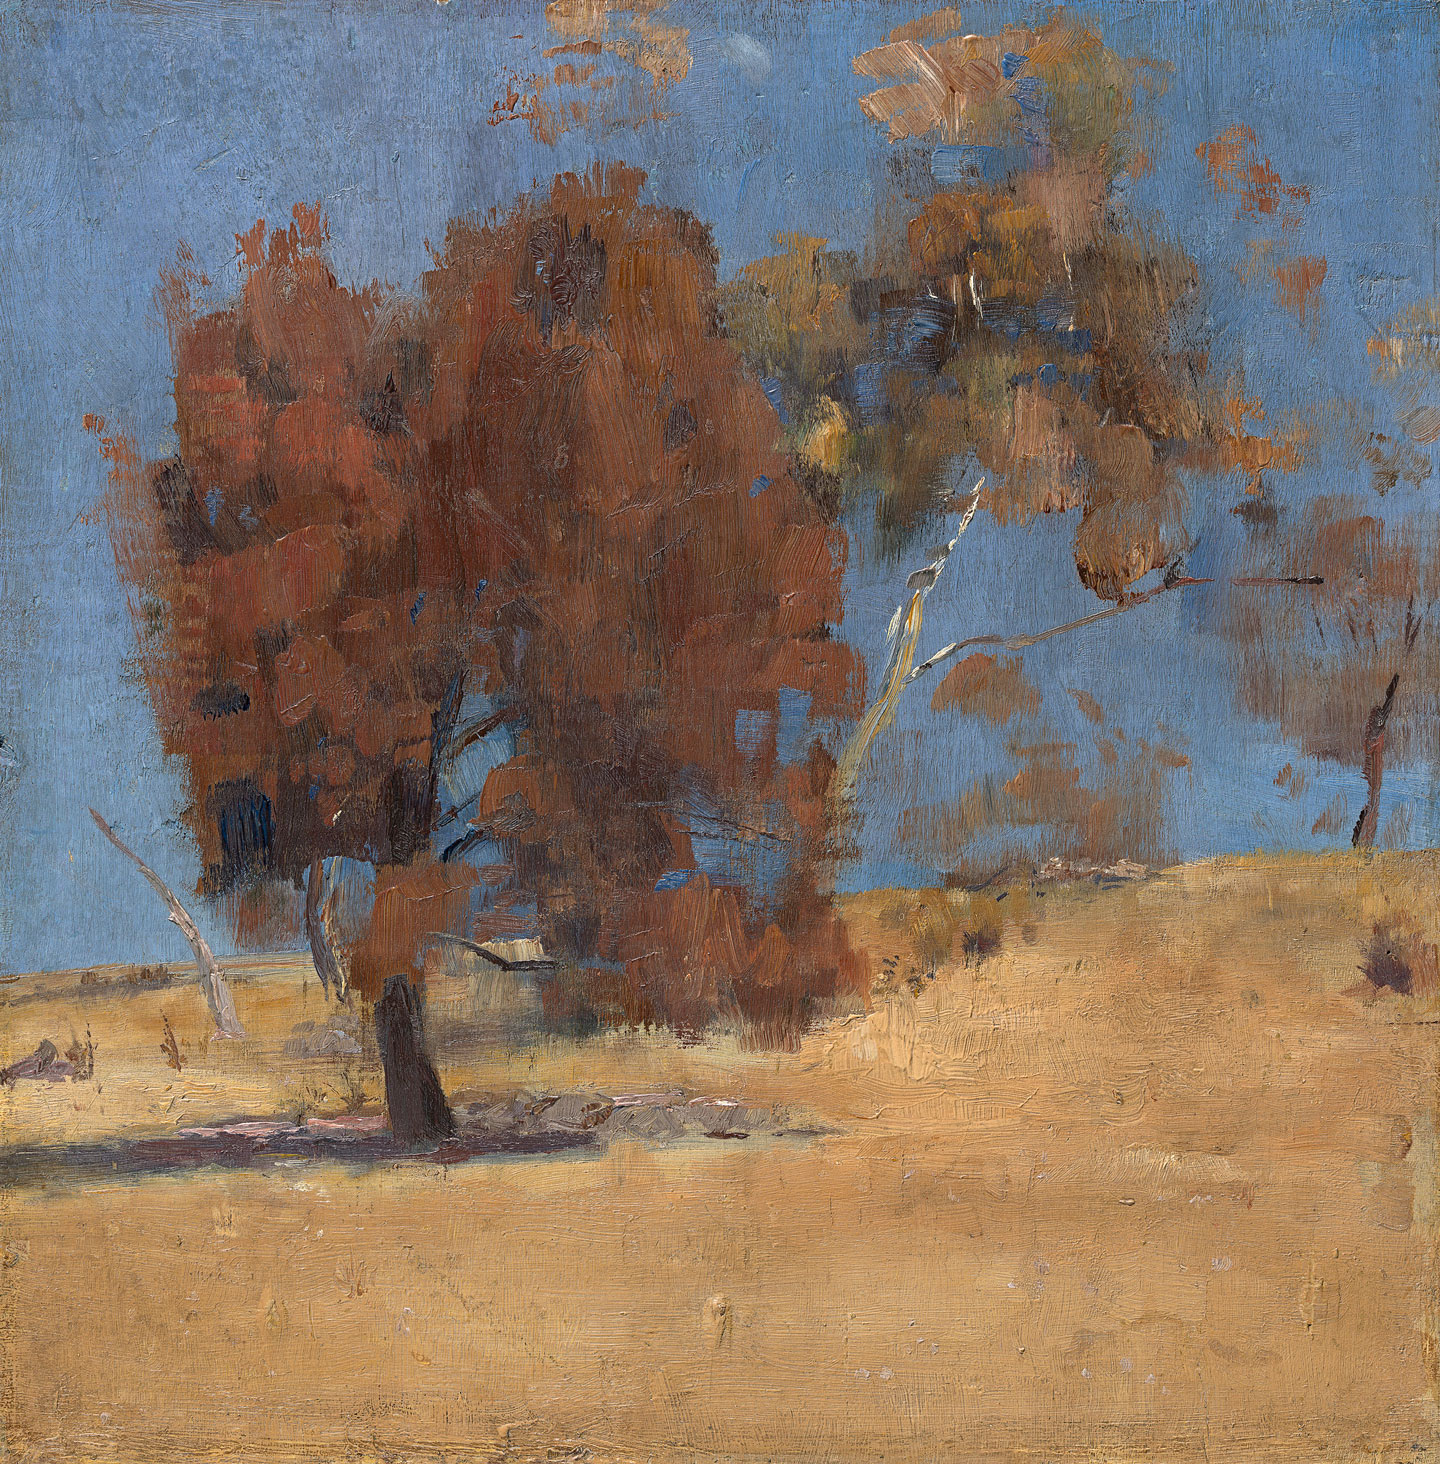 She-Oak and Sunlight at the NGV includes work by Tom Roberts.